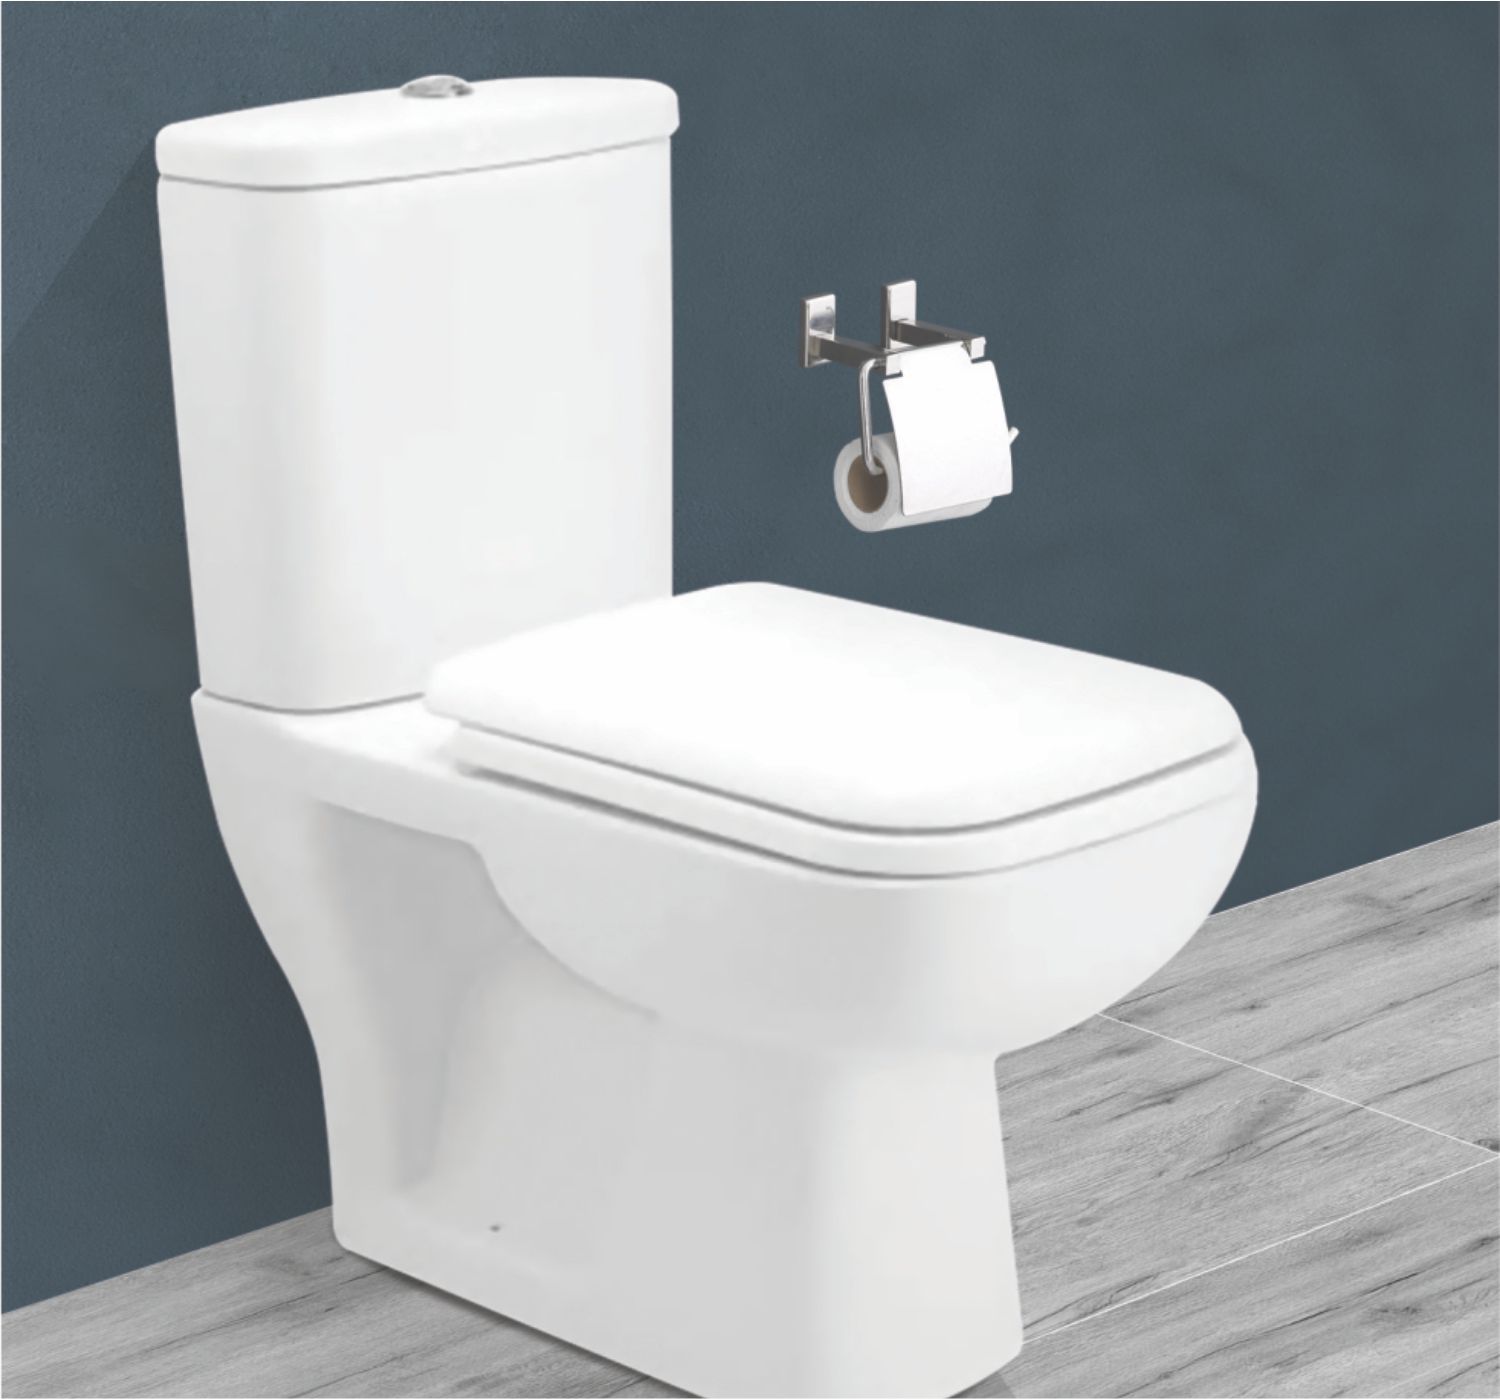 Ceramic Two Piece Water Closet Set Manufacturer and Supplier